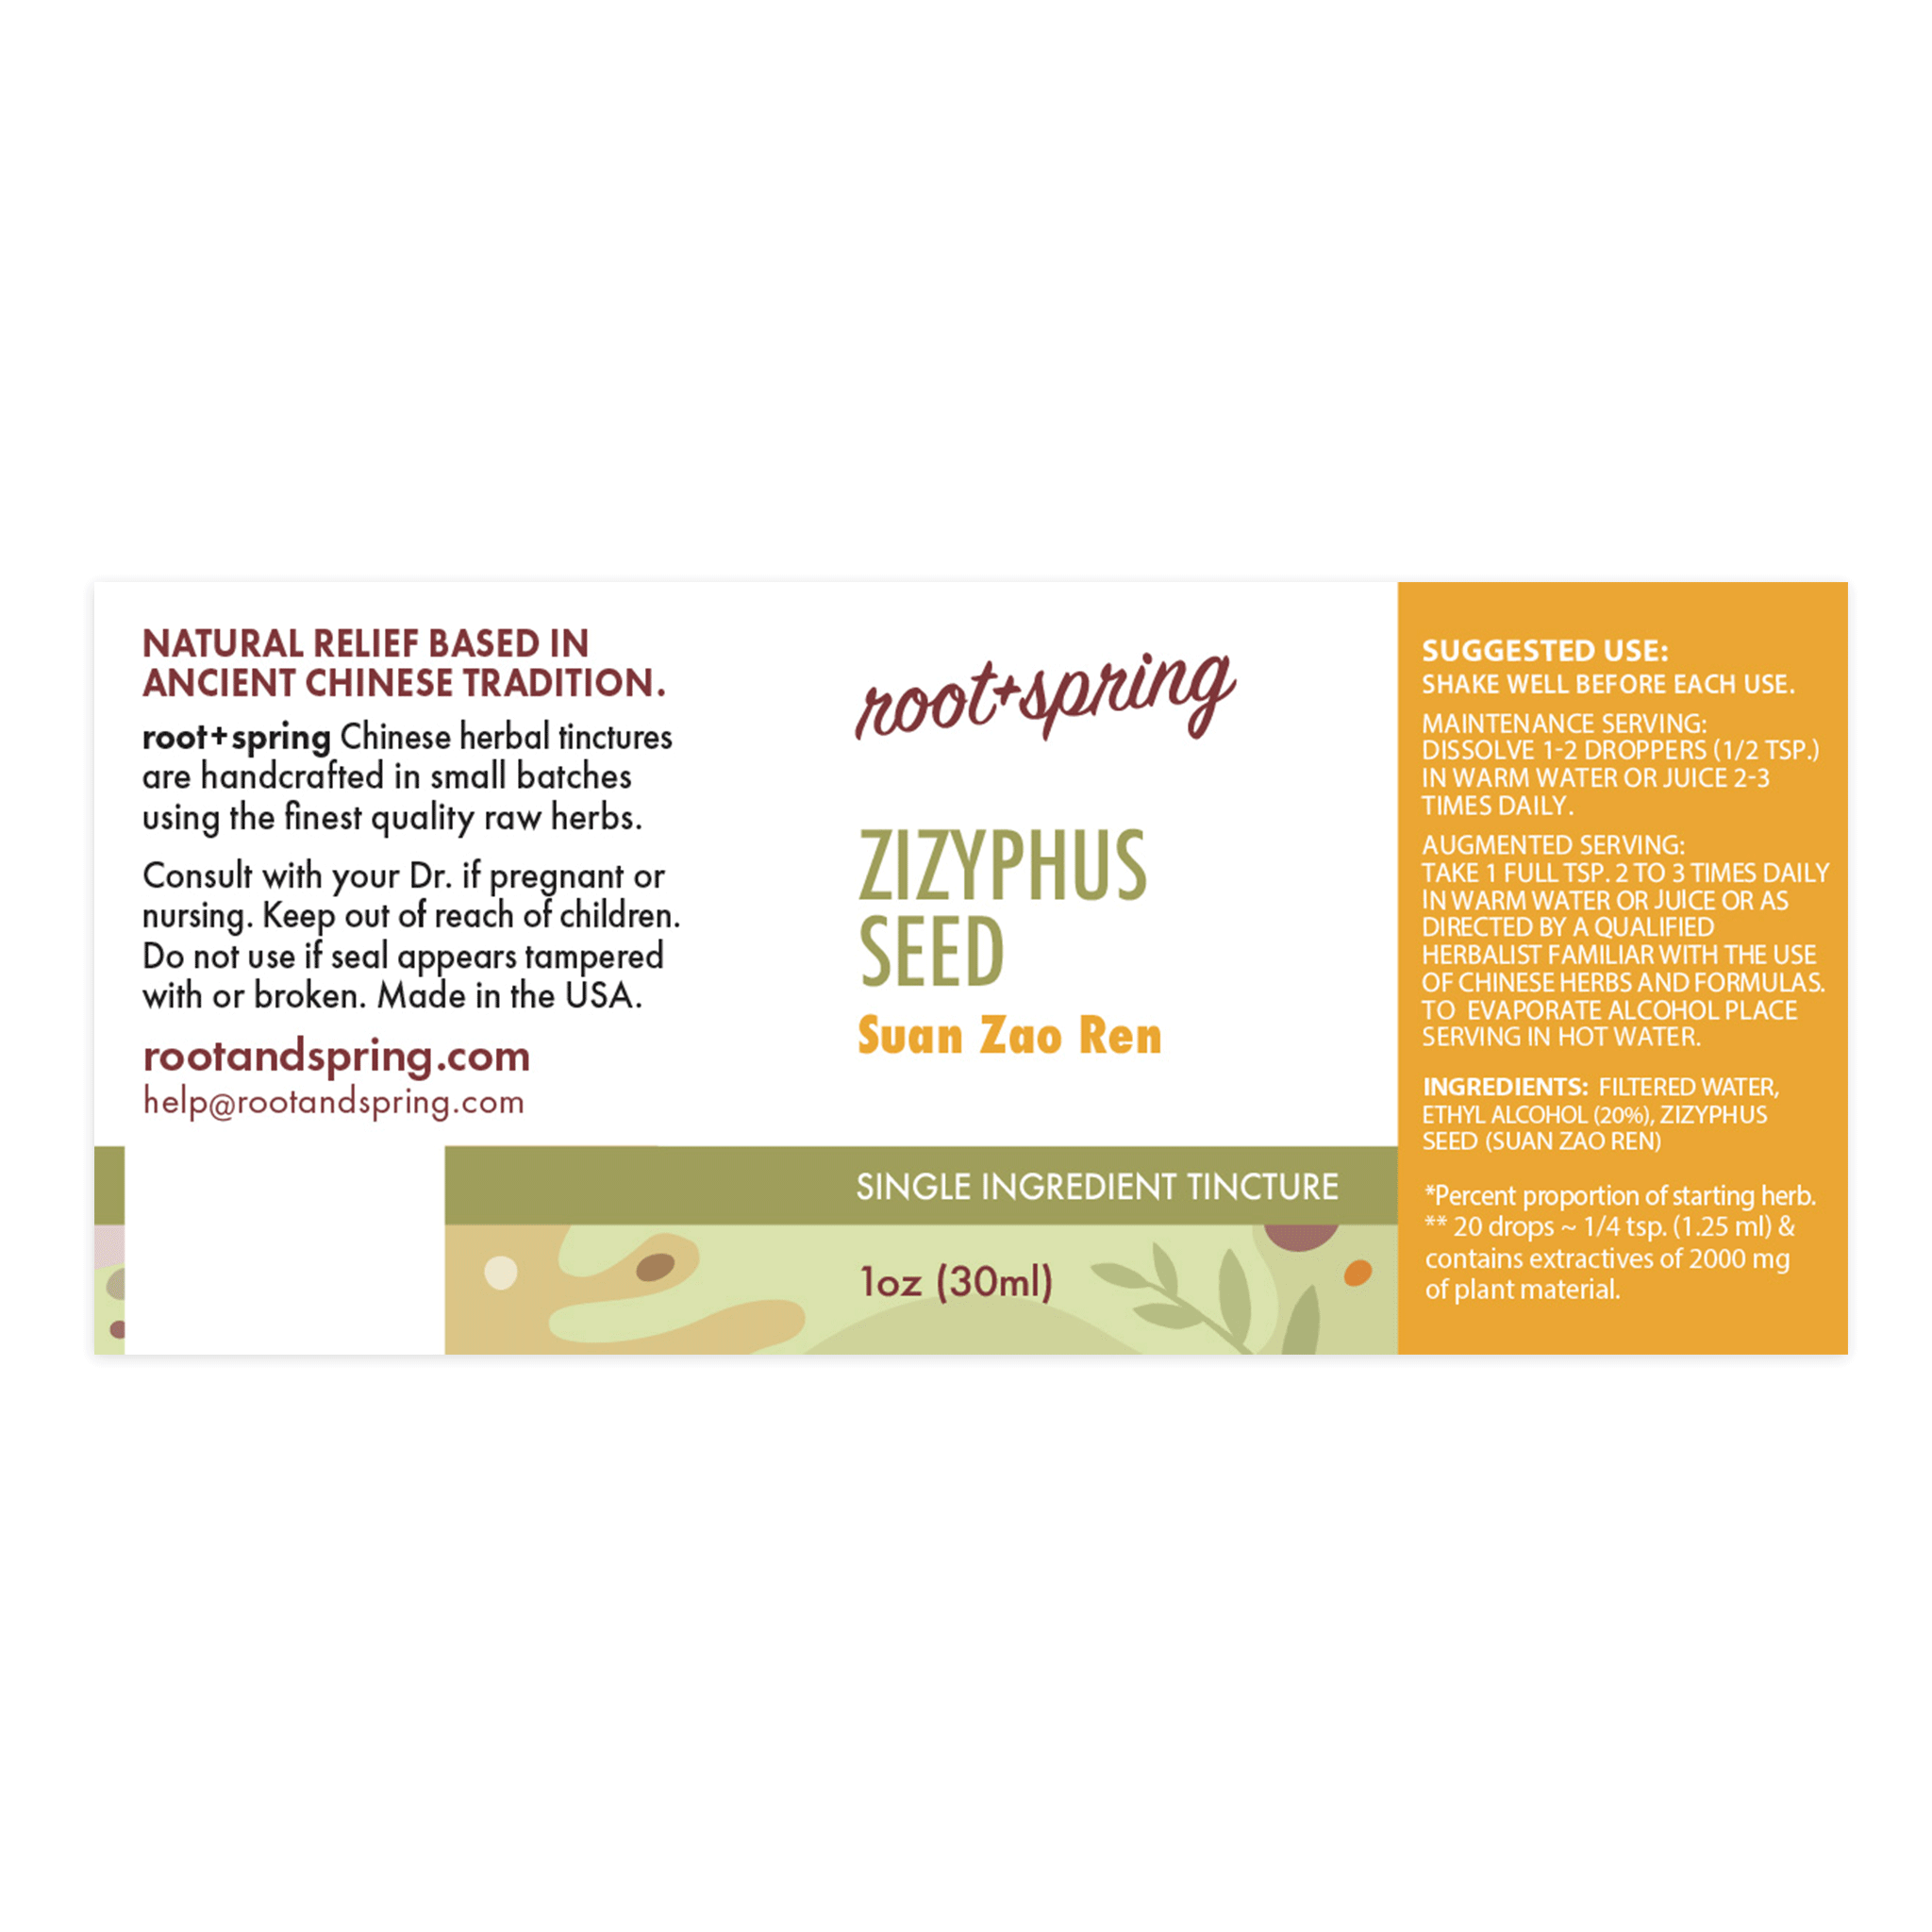 Label for Zizyphus Seed, or Suan Zao Ren, Herbal Tincture by root + spring